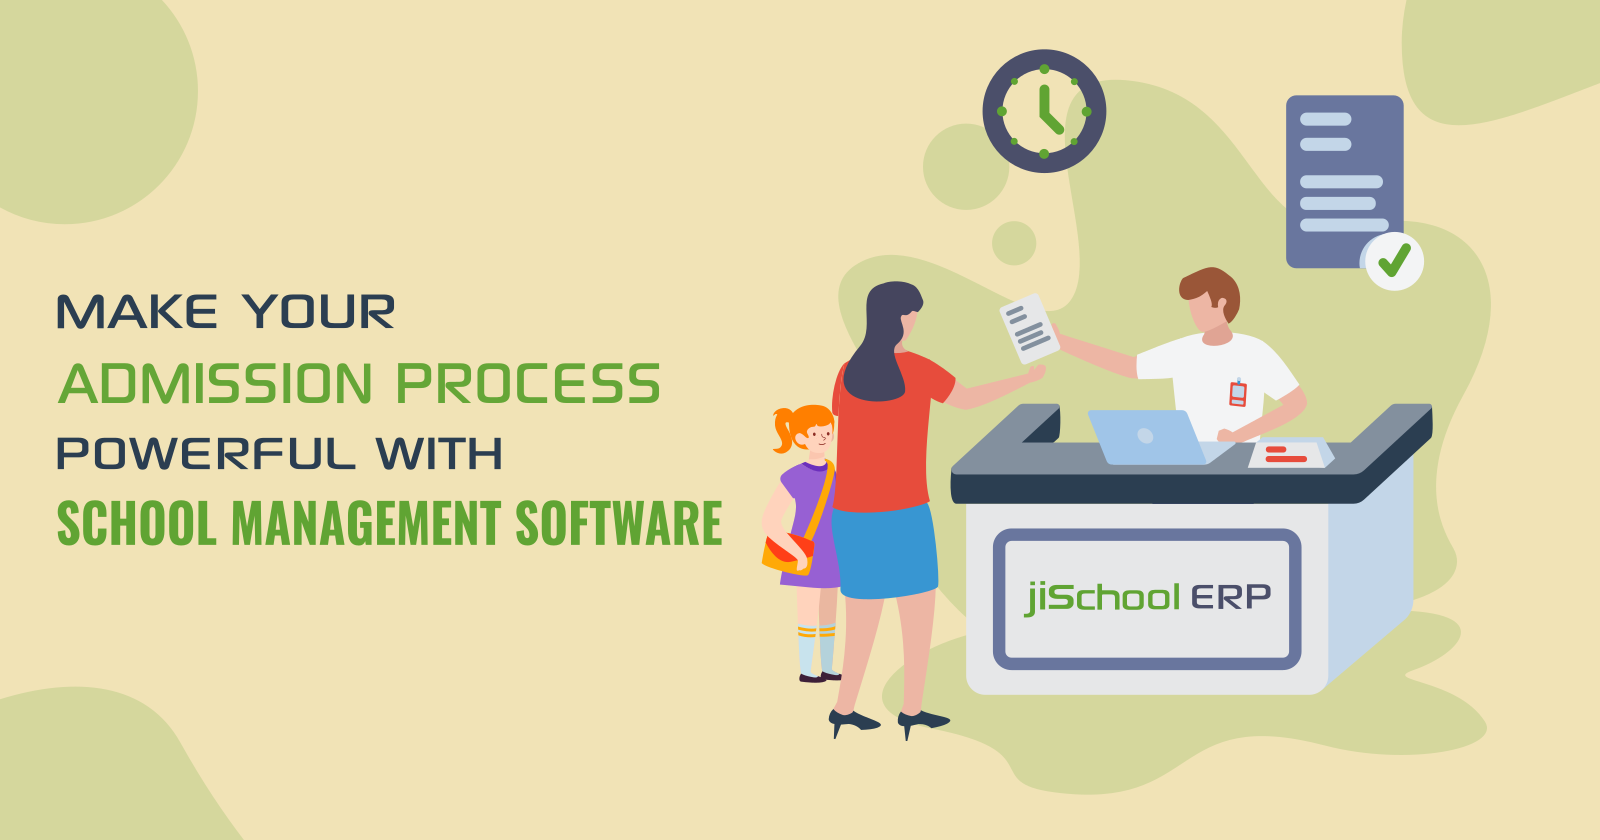 Make Your Admission Process Powerful With School Management Software